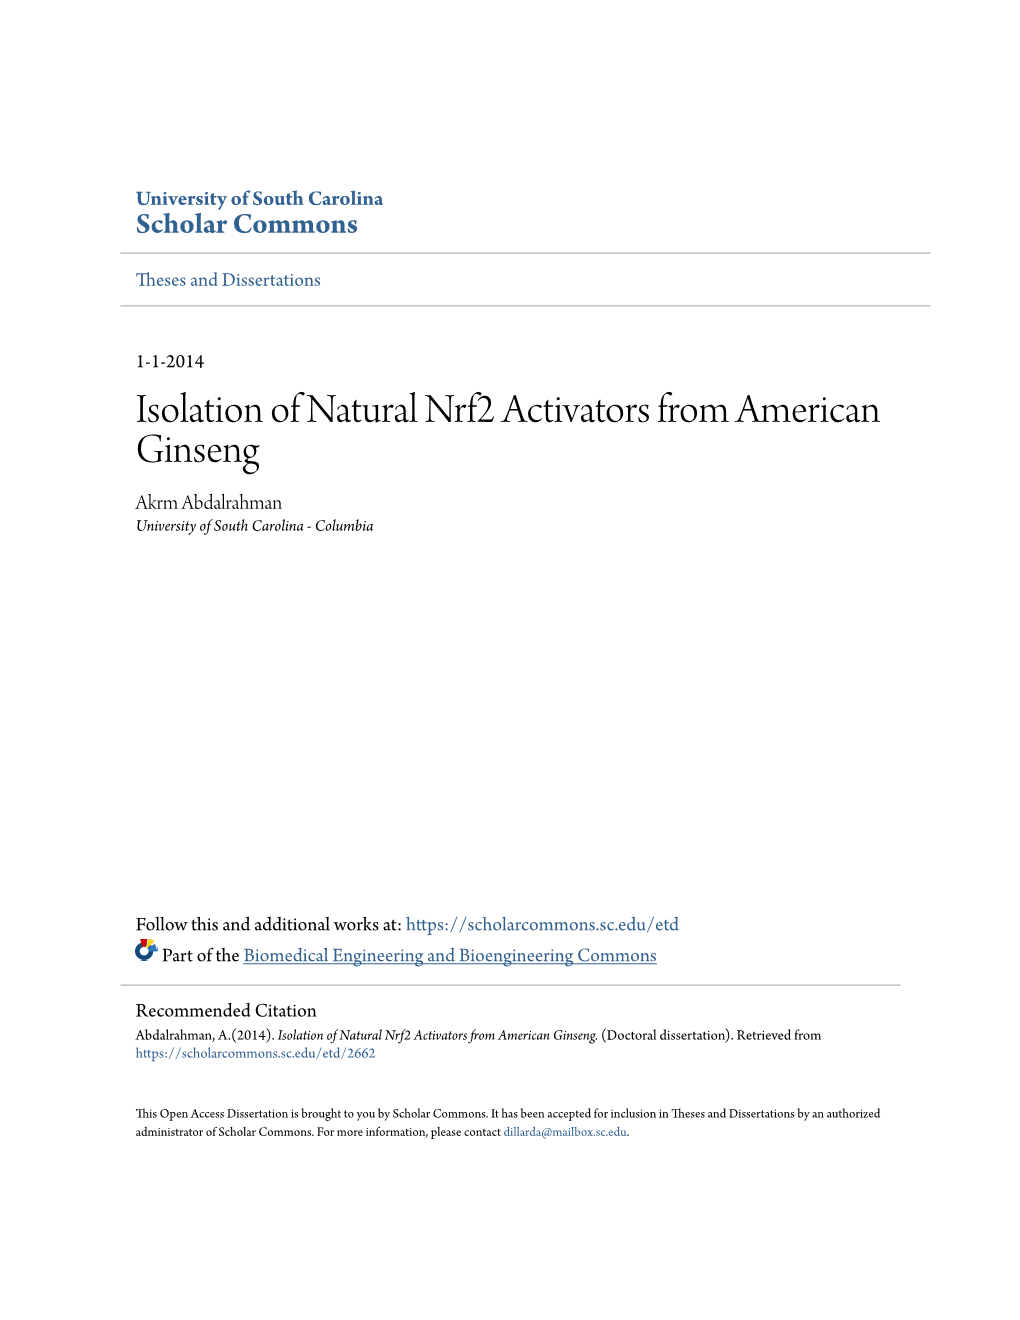 Isolation of Natural Nrf2 Activators from American Ginseng Akrm Abdalrahman University of South Carolina - Columbia